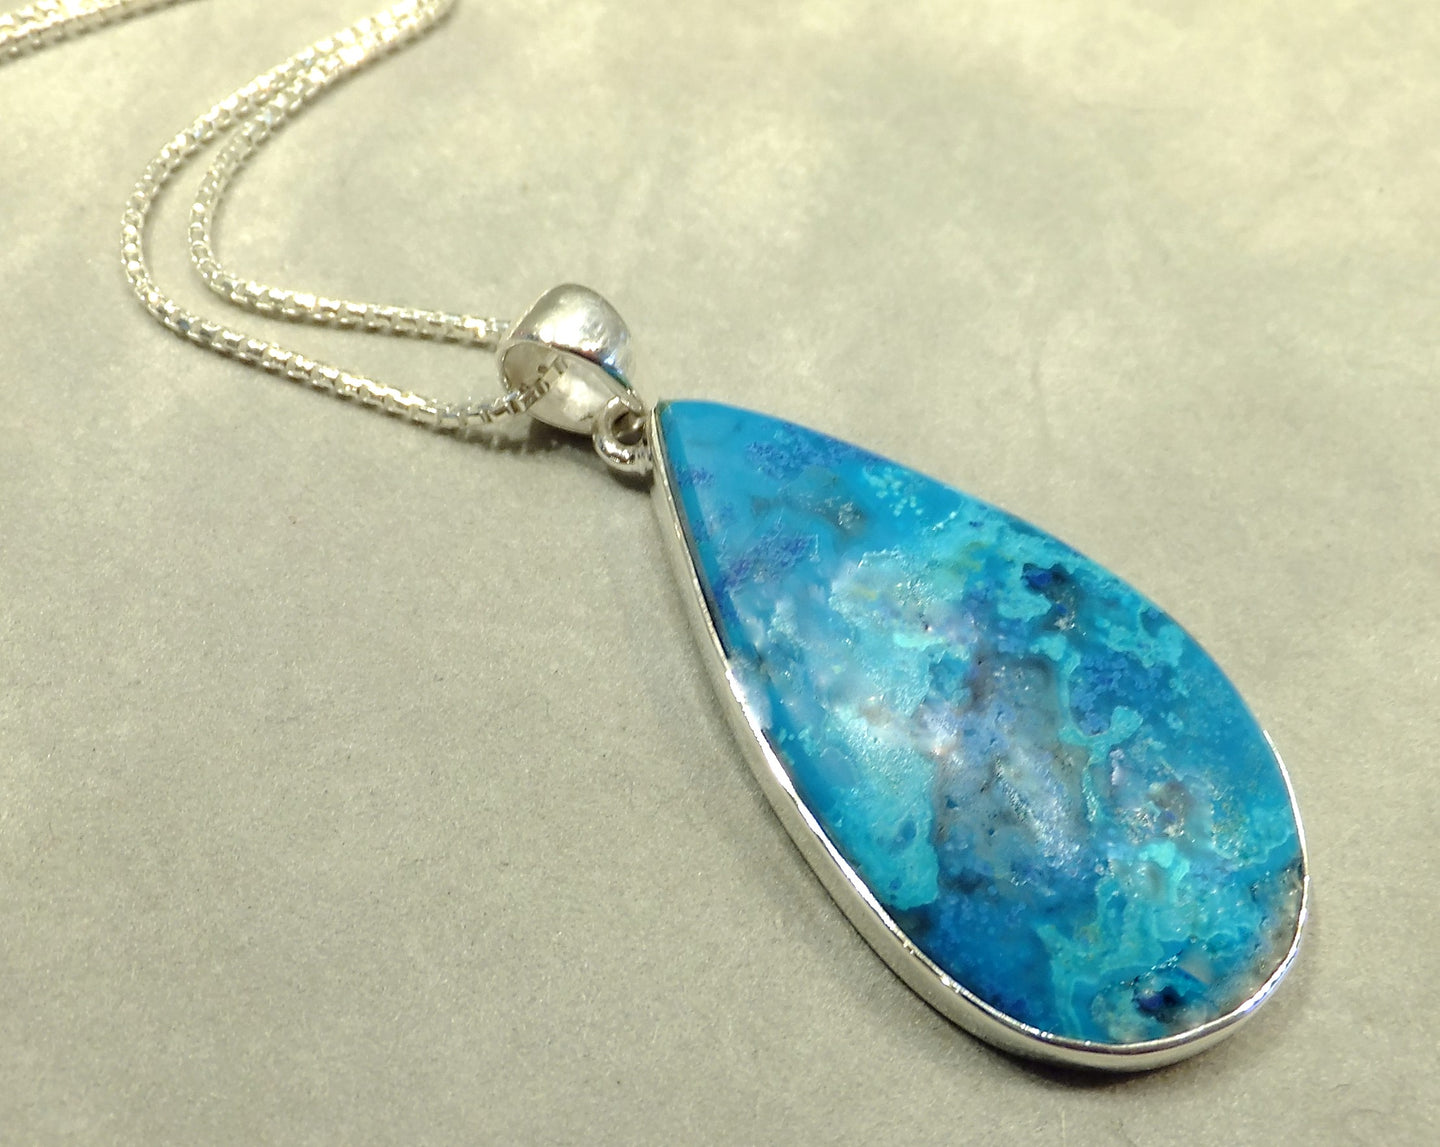 Turquoise pendant necklace in sterling silver